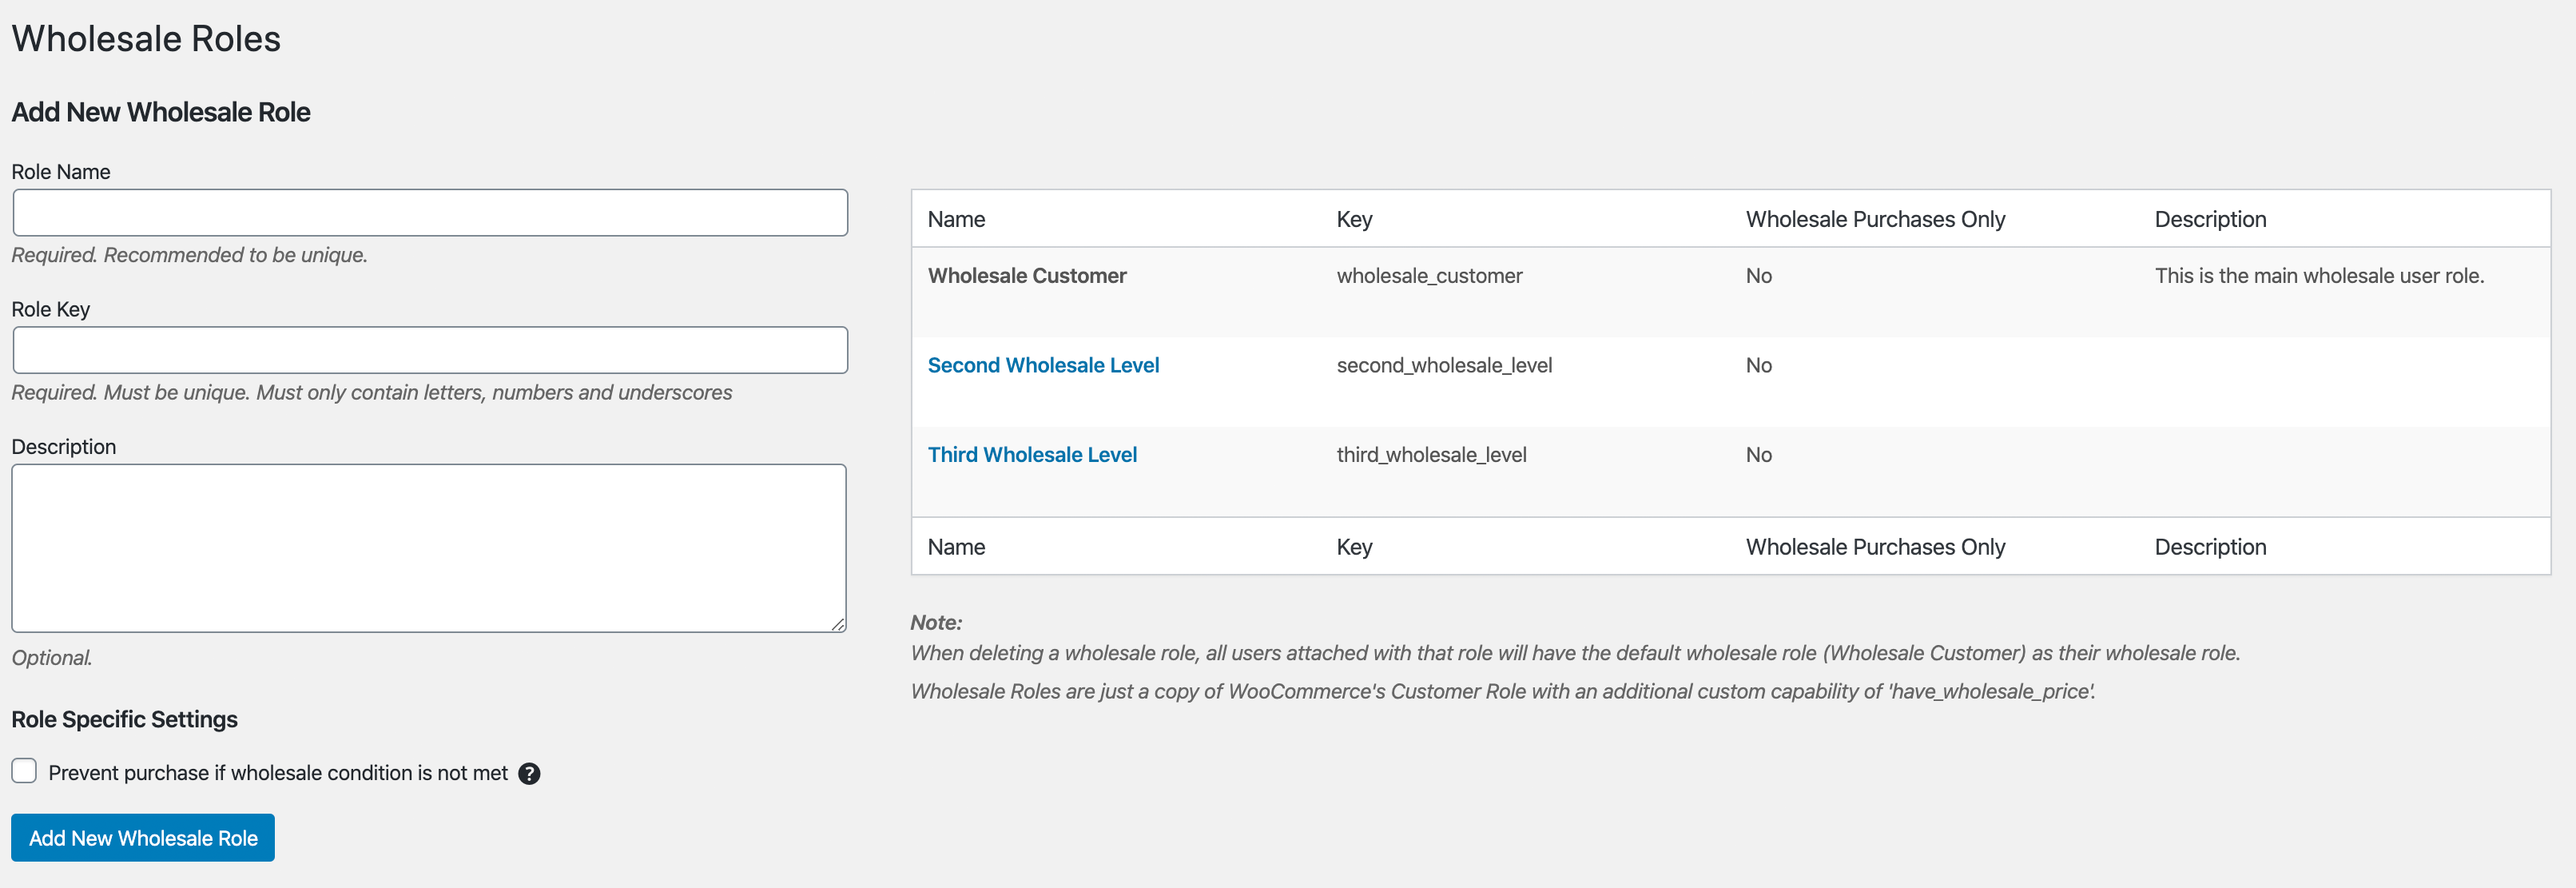 Adding Wholesale Roles In WooCommerce With Wholesale Suite